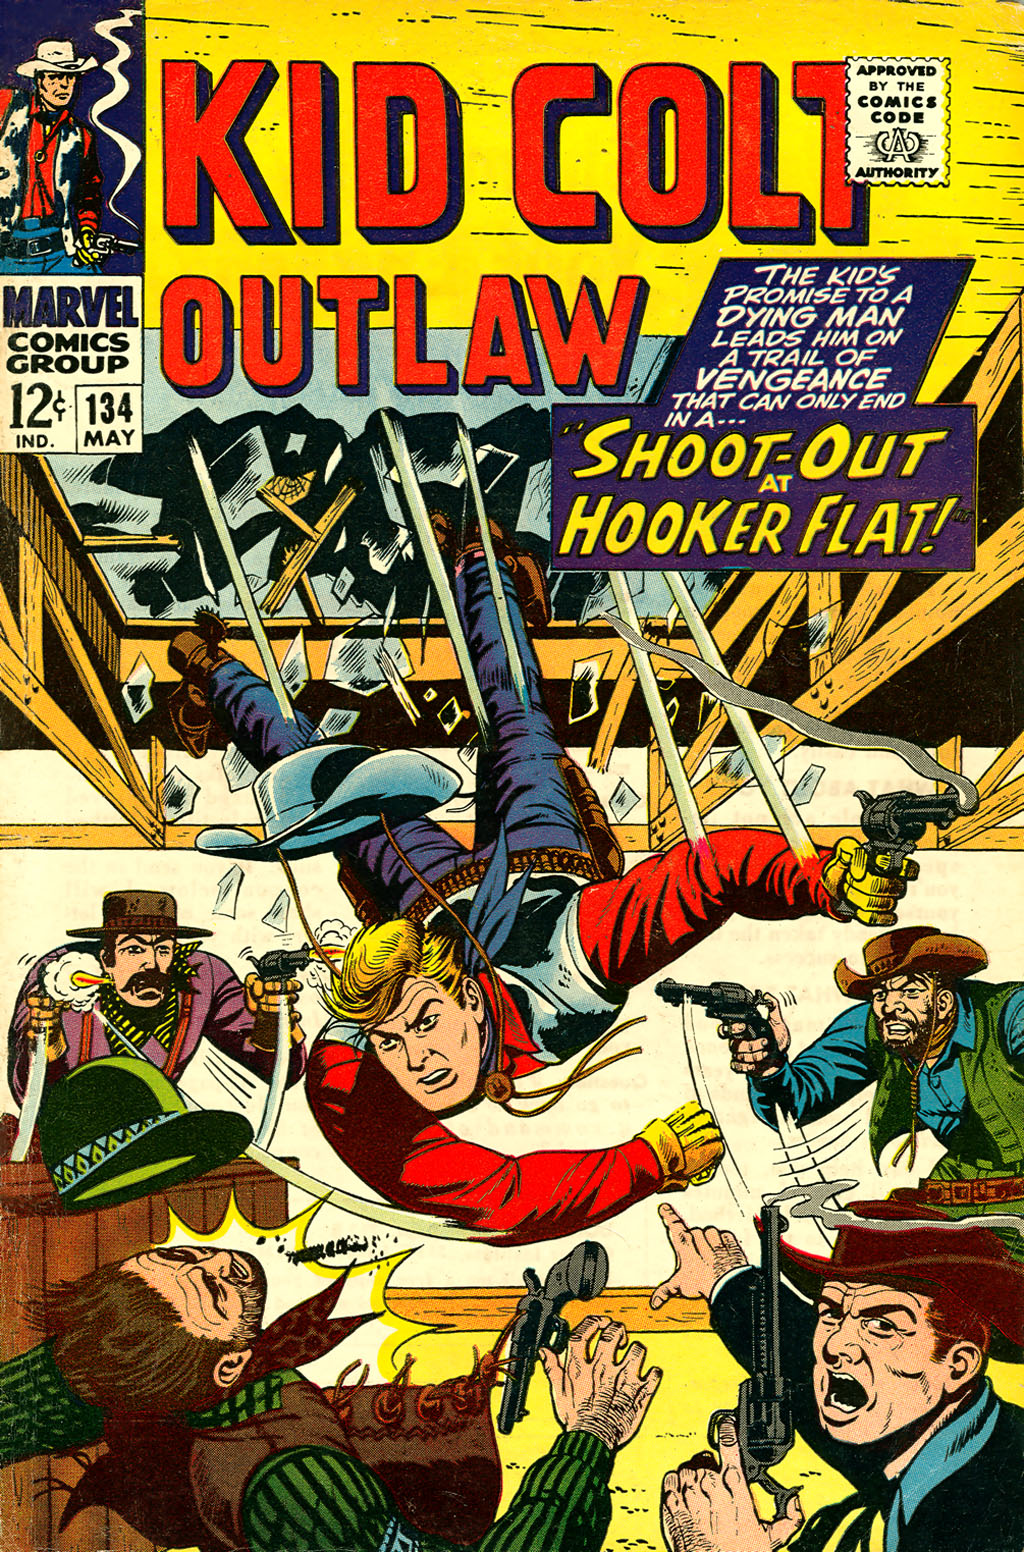 Read online Kid Colt Outlaw comic -  Issue #134 - 1